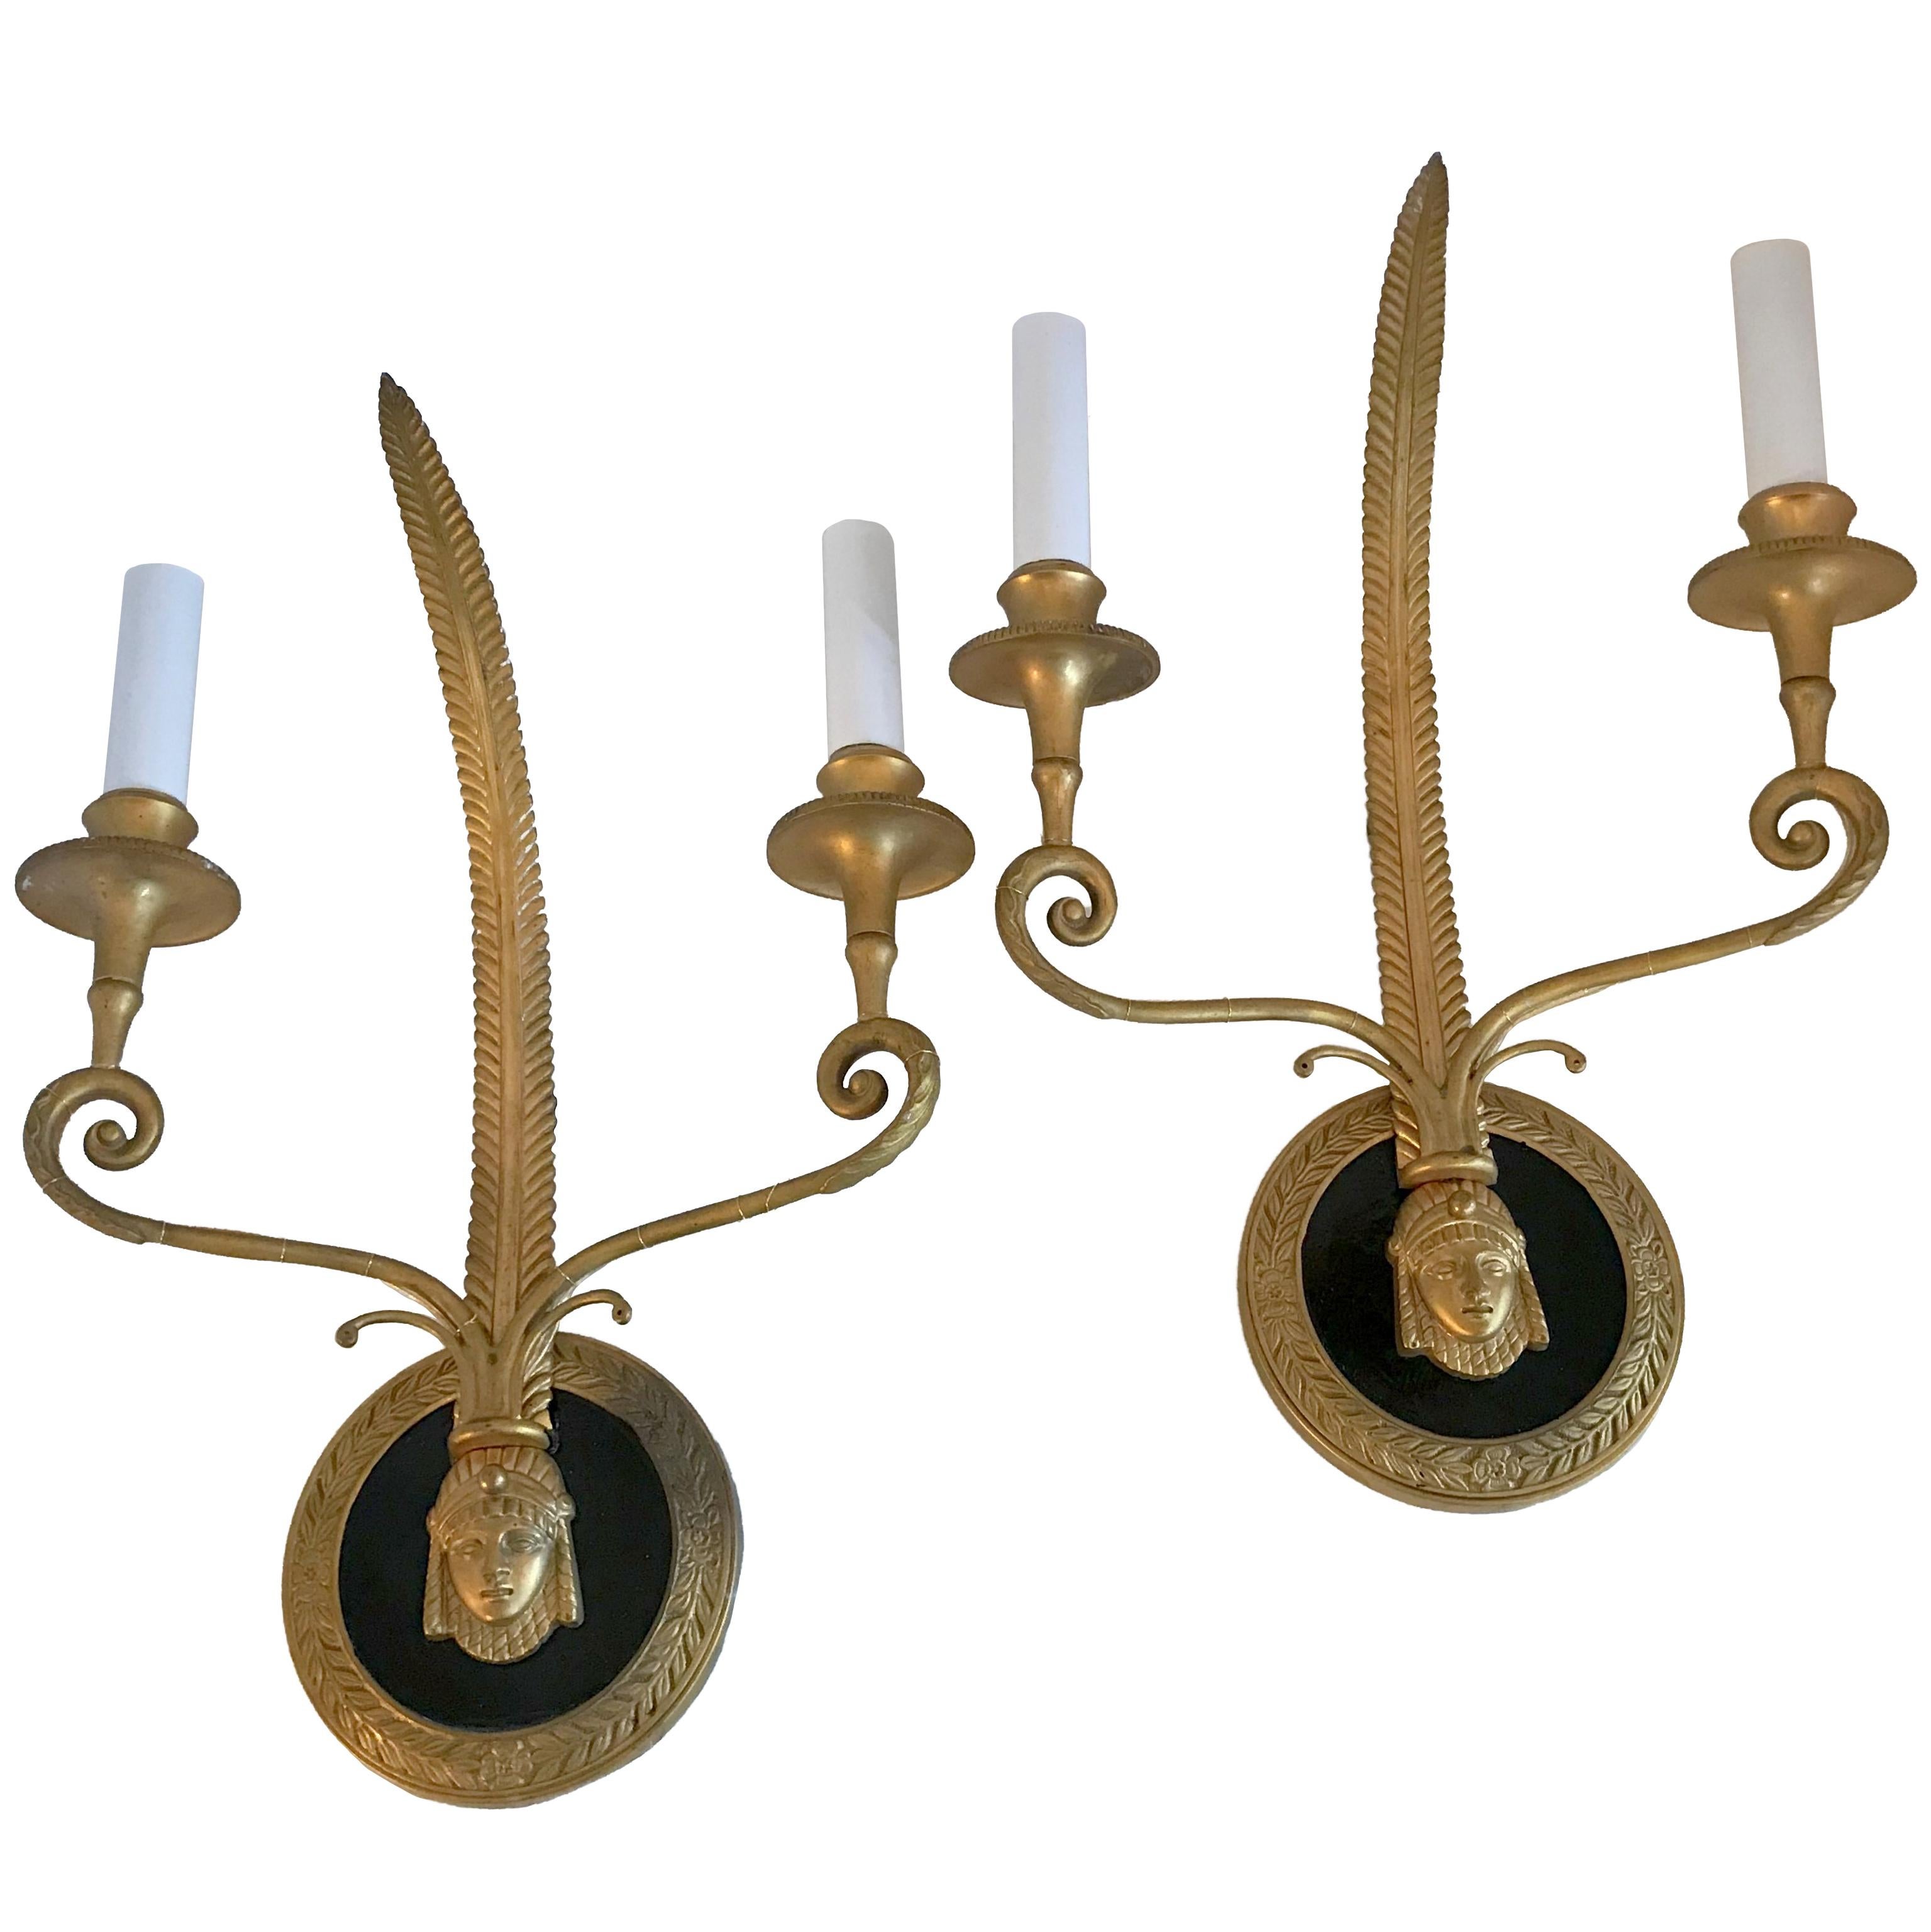 Wonderful Pair of French Empire Gilt and Patinated Bronze Medusa Figure Sconces